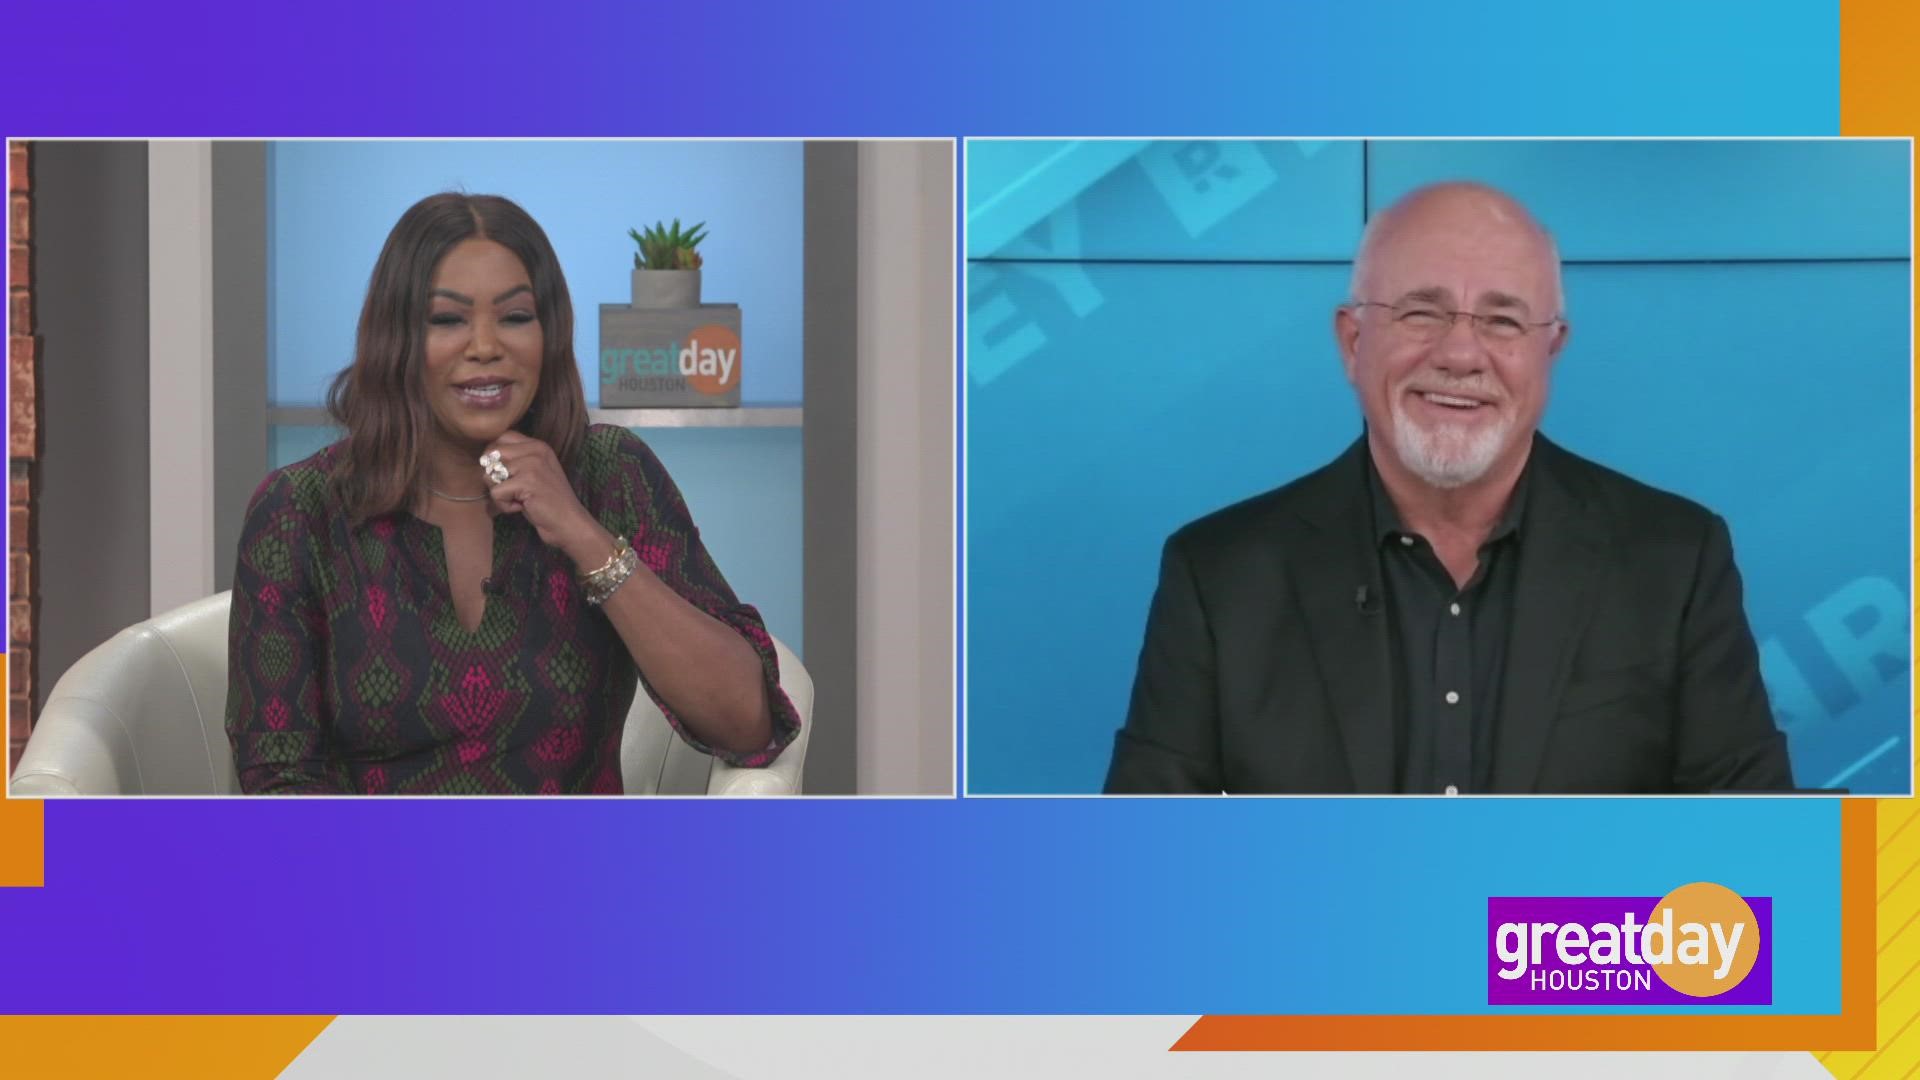 Dave Ramsey shares tips to avoid the student loan trap and still get the education you want.